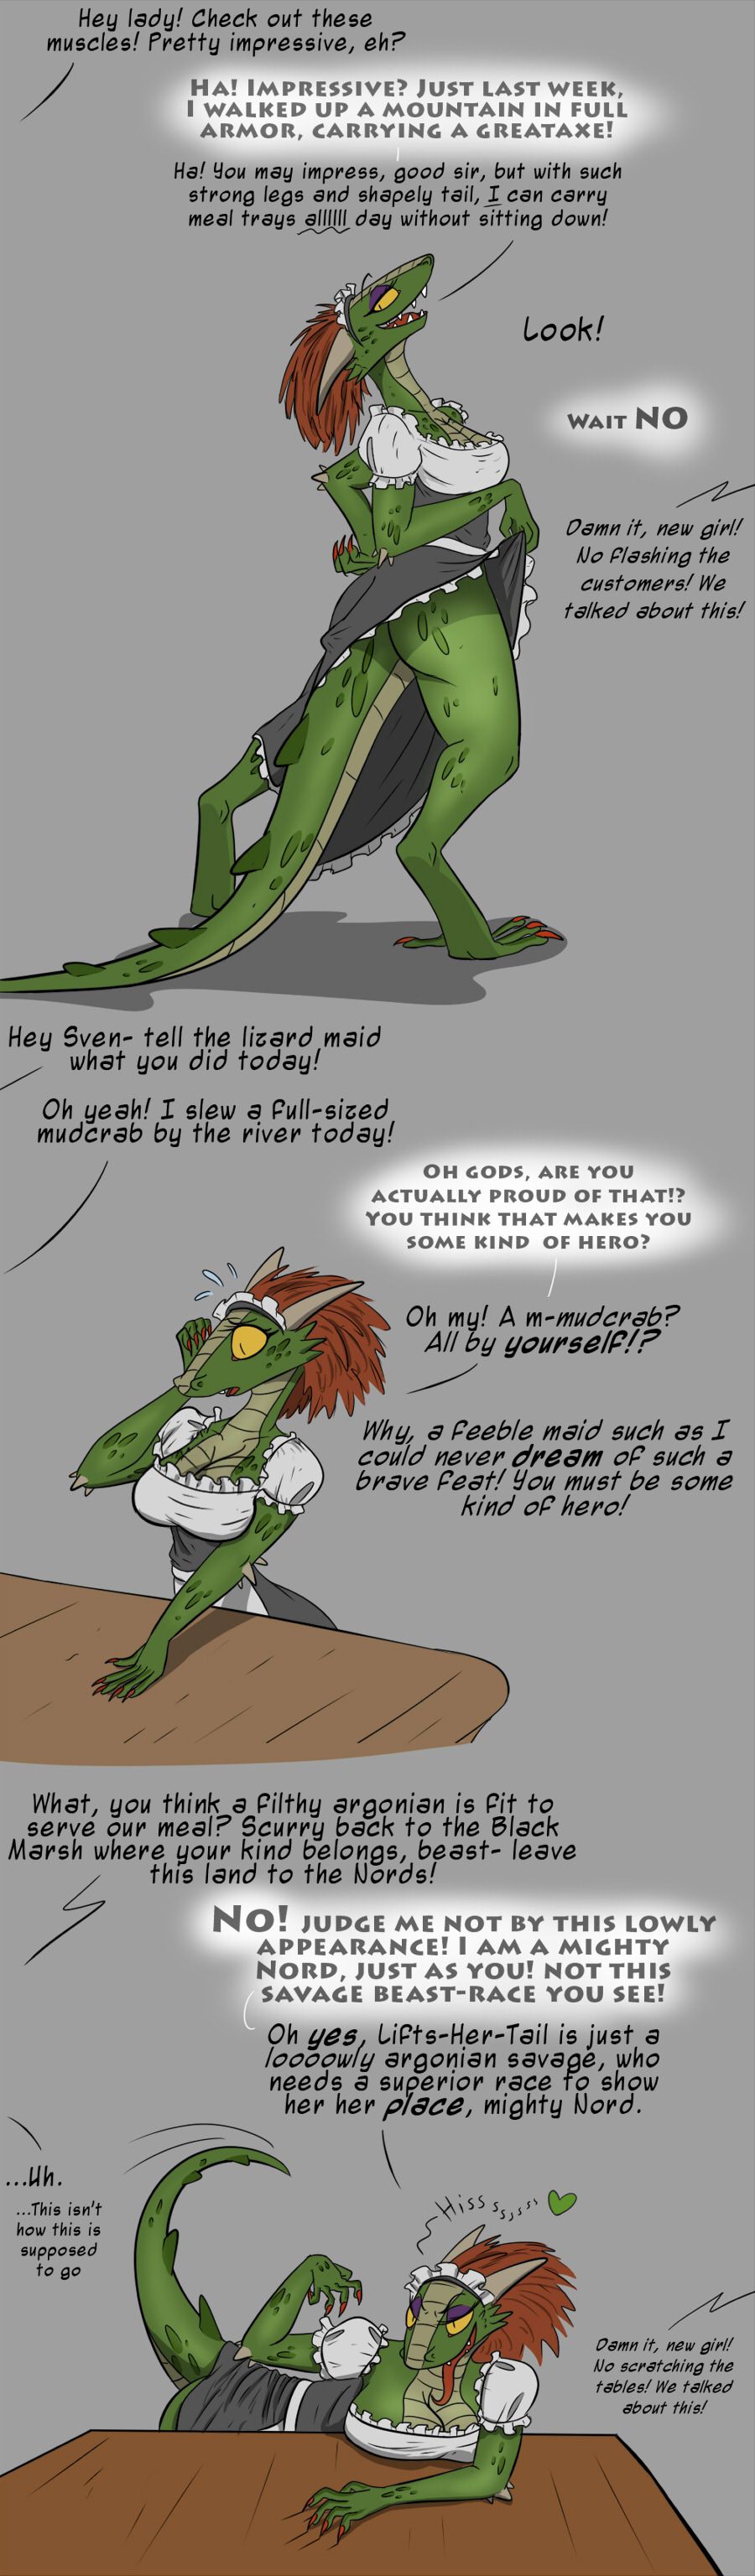 [Valsalia] Lusty Argonian Maid'd [Ongoing] 2